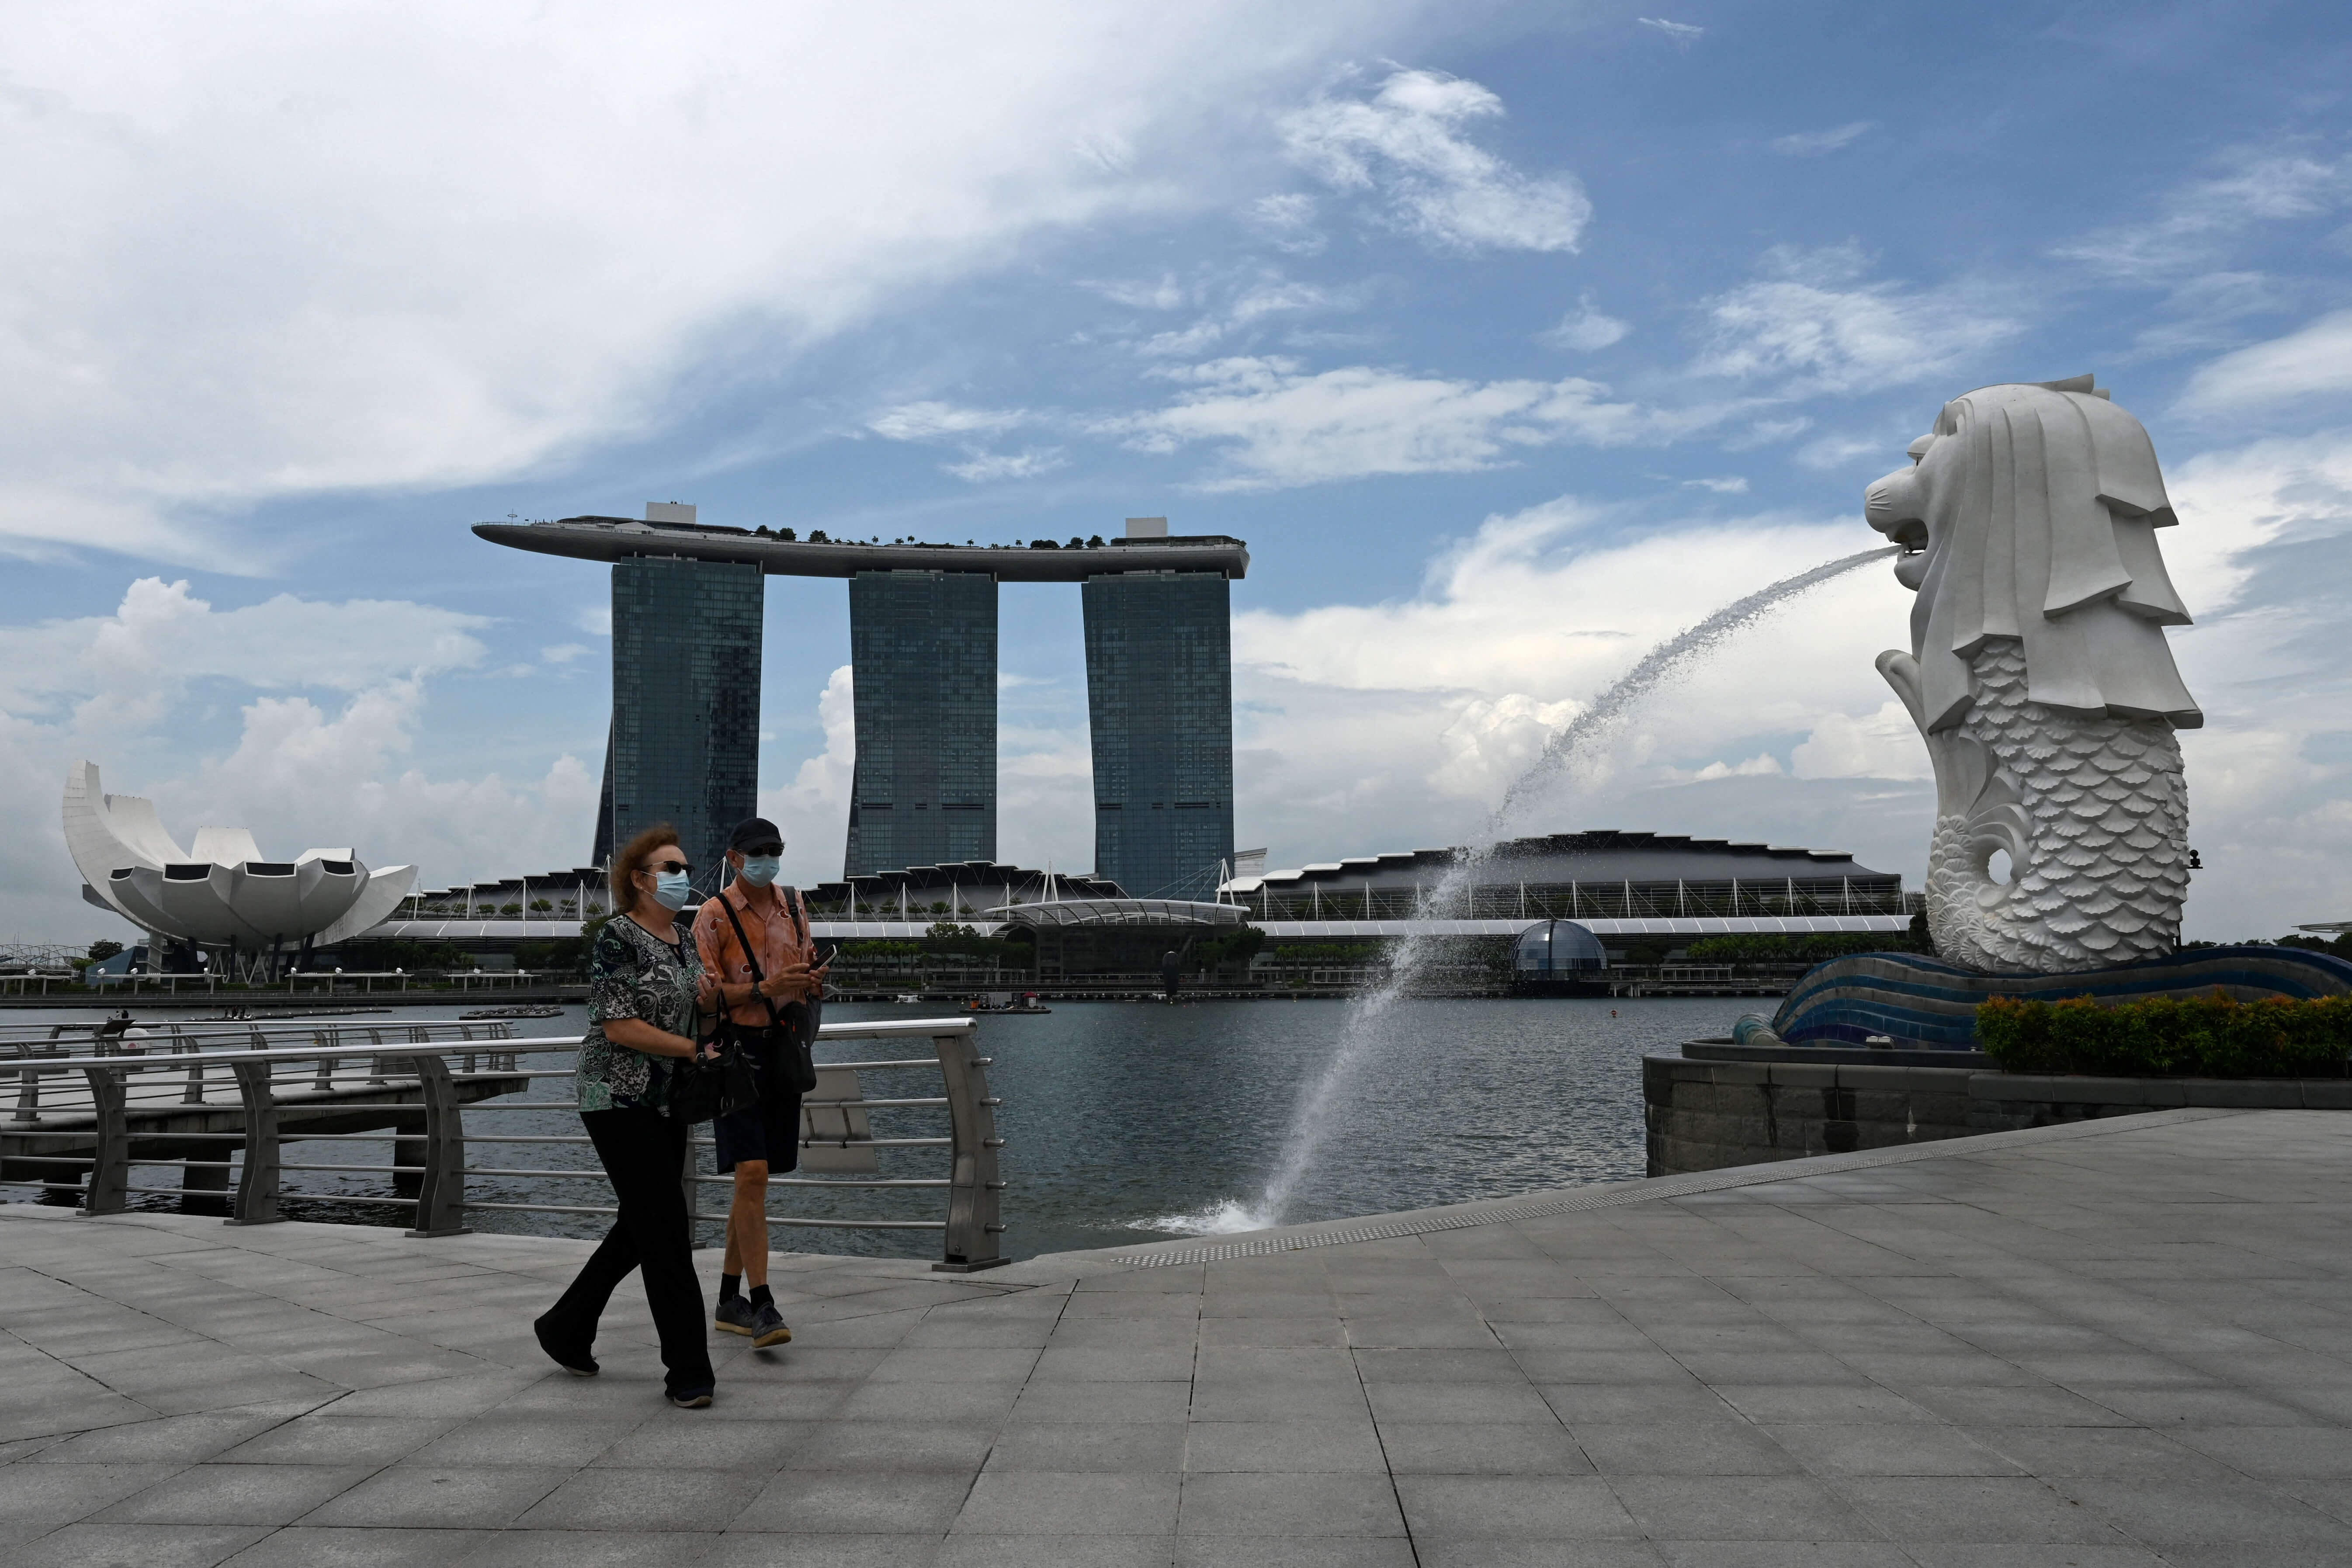 Singapore shuts borders to students, travellers over Omicron concerns